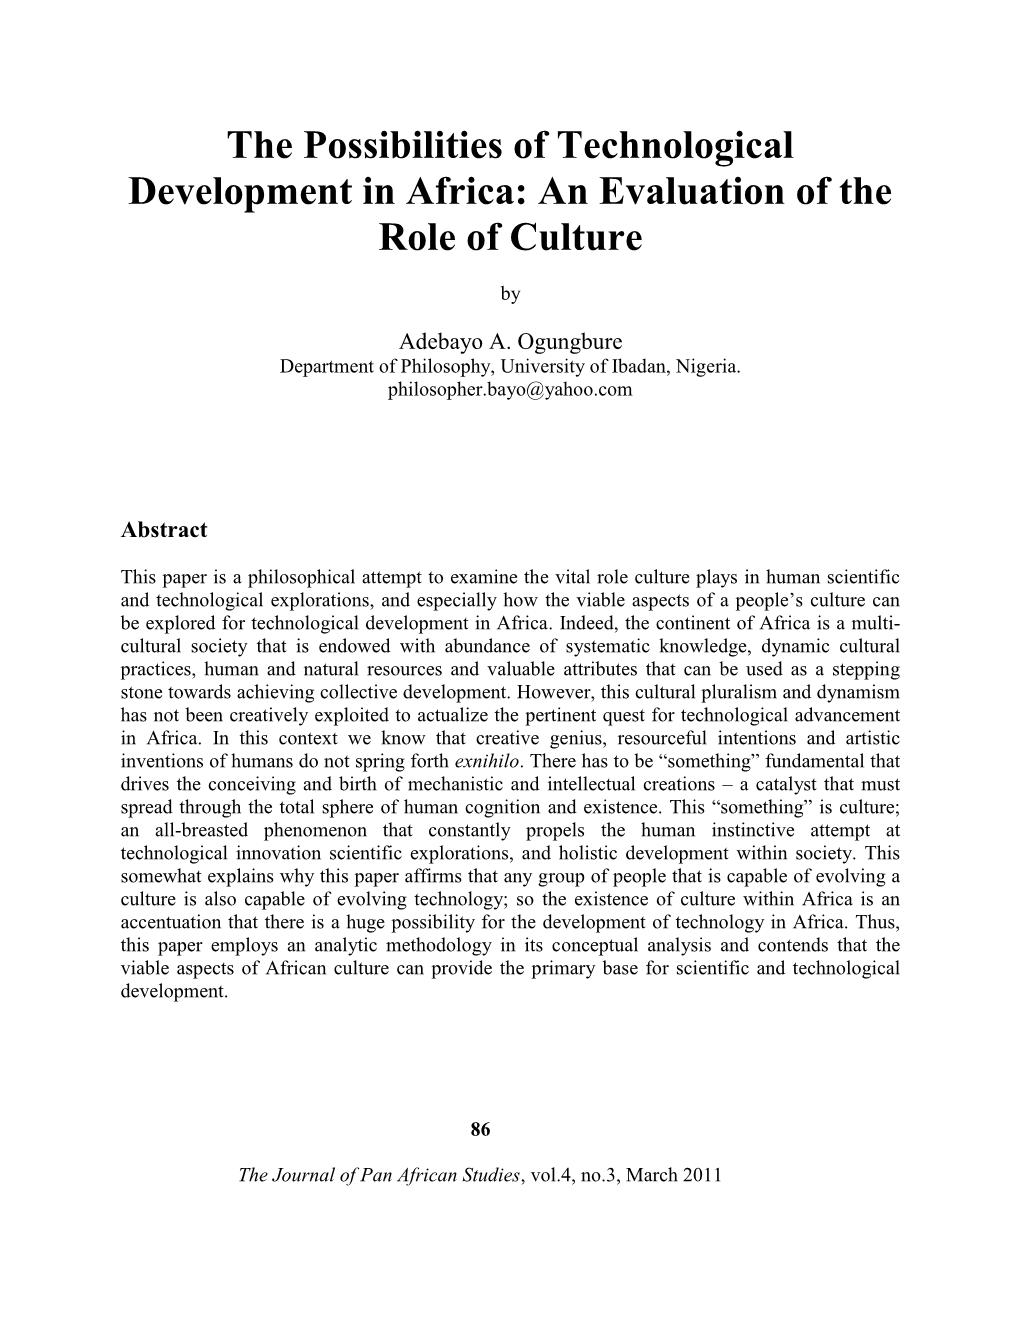 The Possibilities of Technological Development in Africa: an Evaluation of the Role of Culture